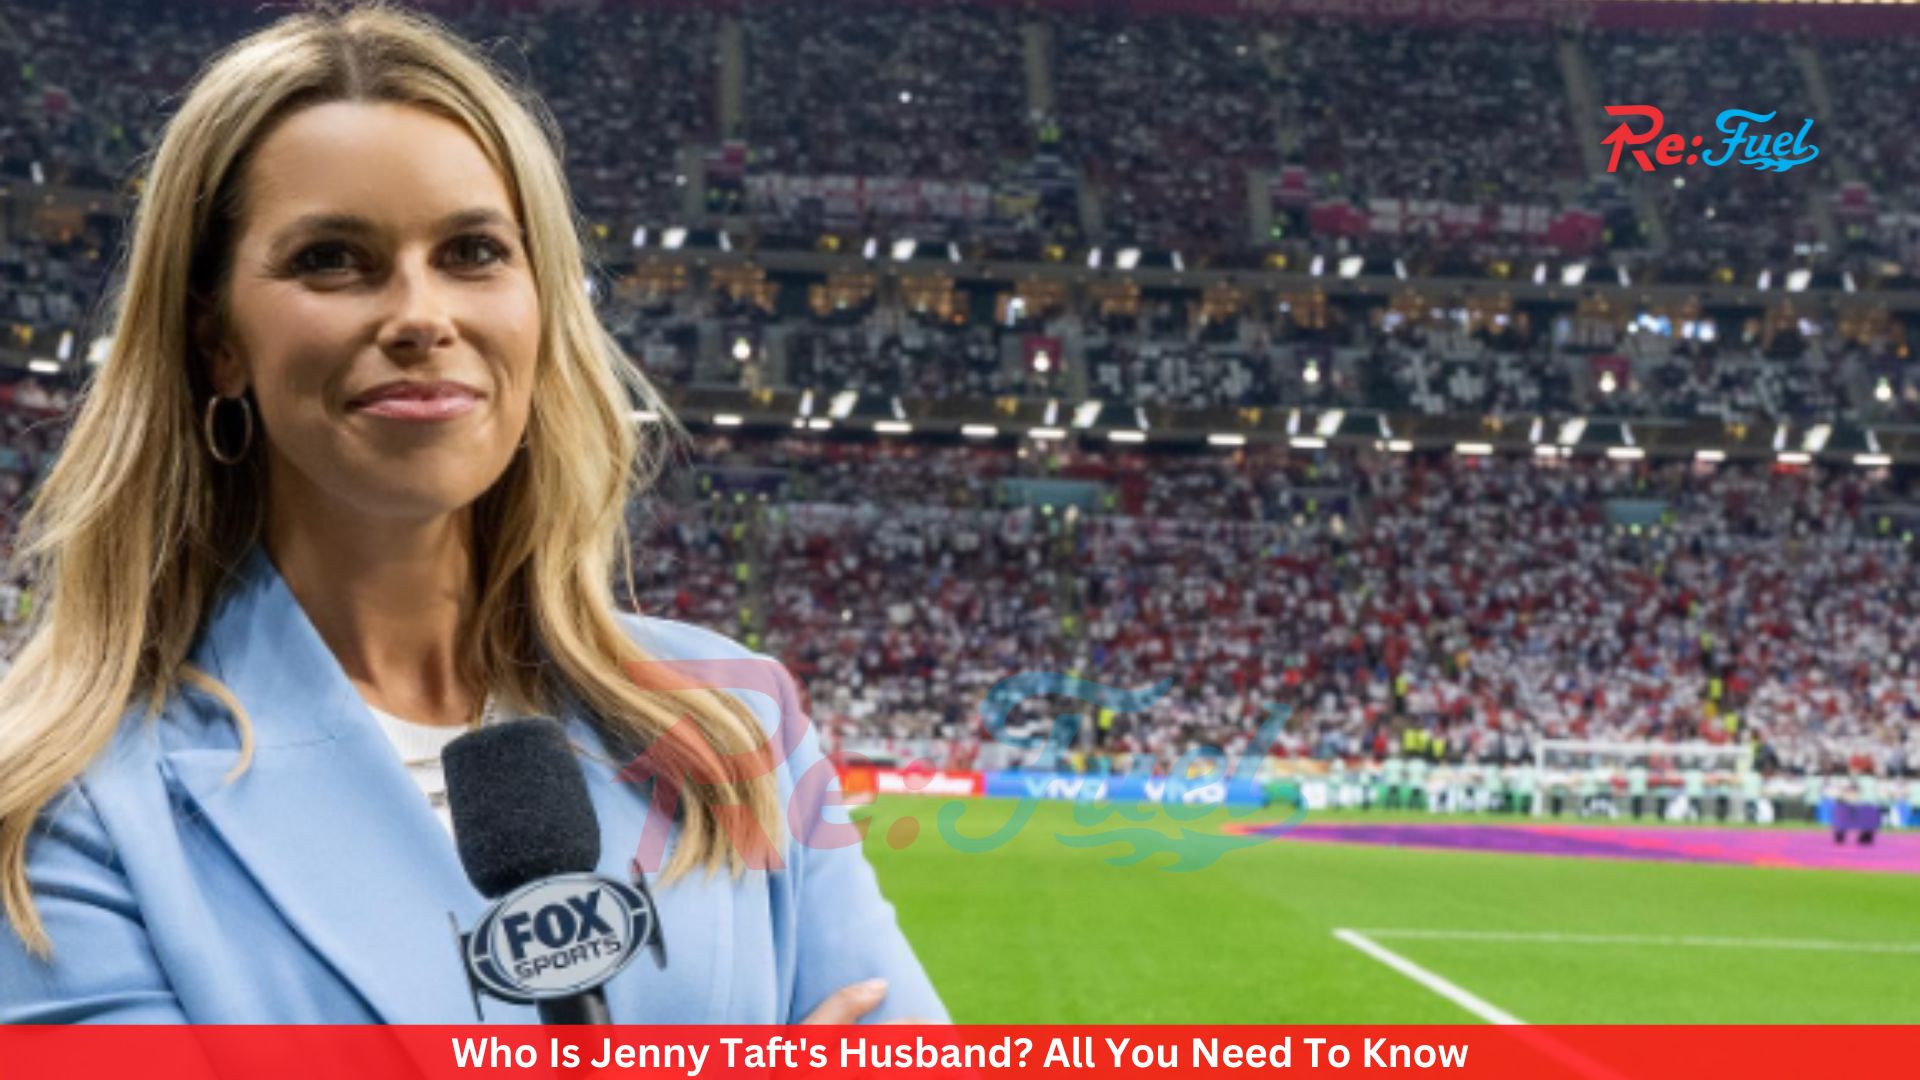 Who Is Jenny Taft's Husband? All You Need To Know